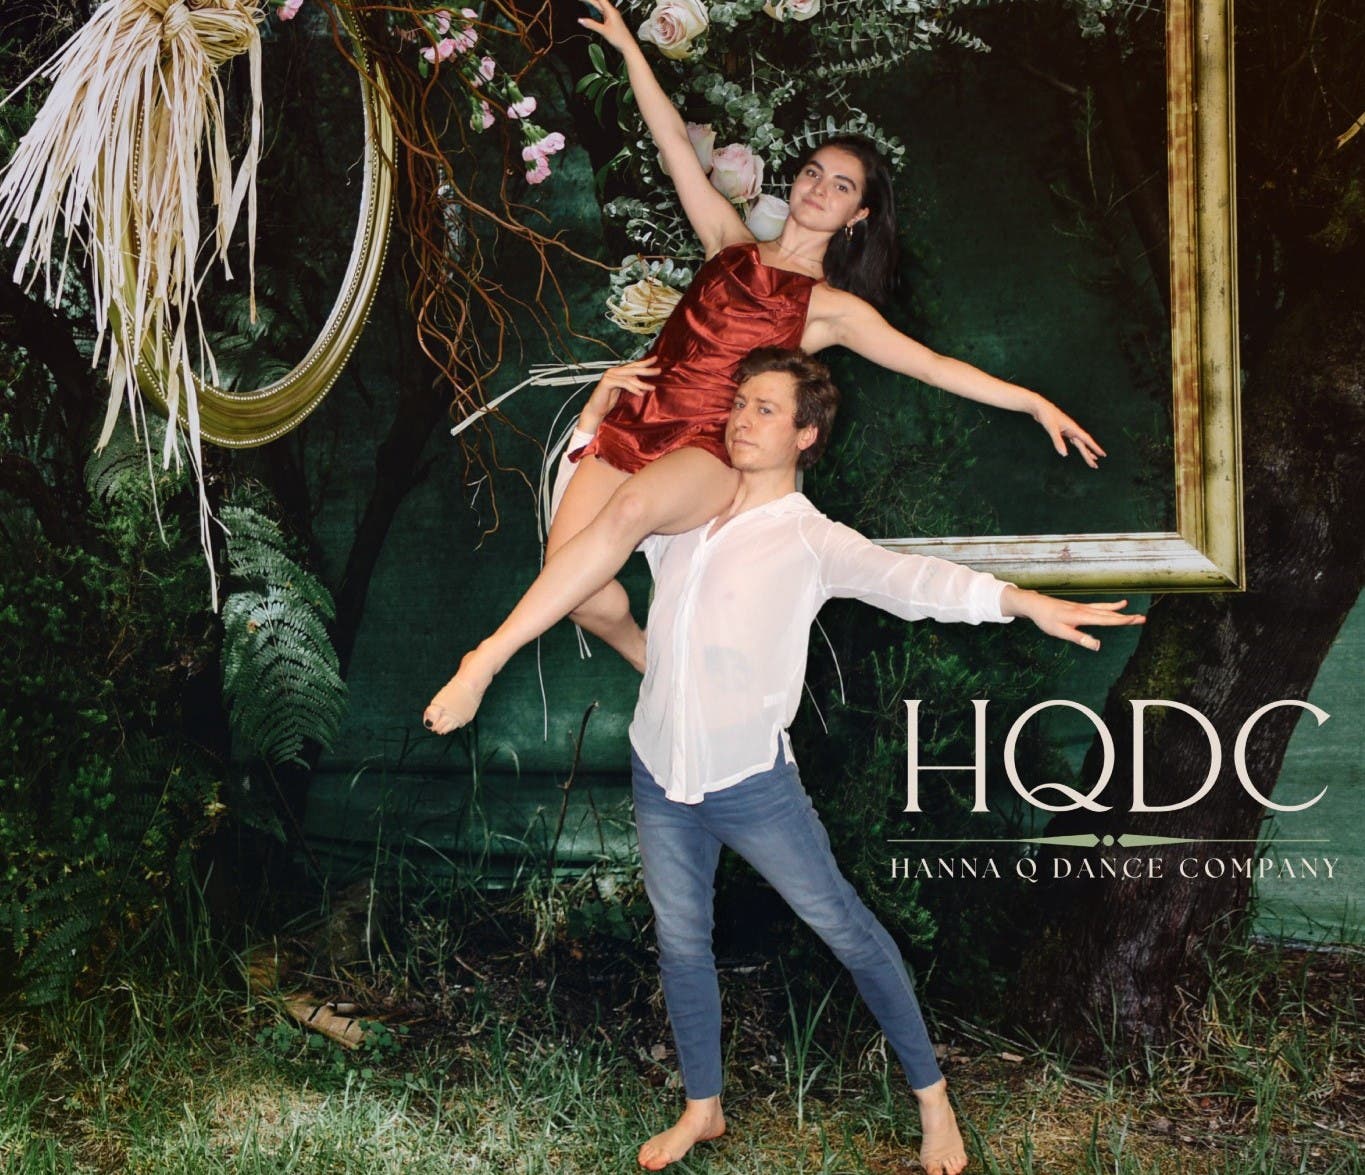 An Evening of Contemporary Dance with the Hanna Q Dance Company